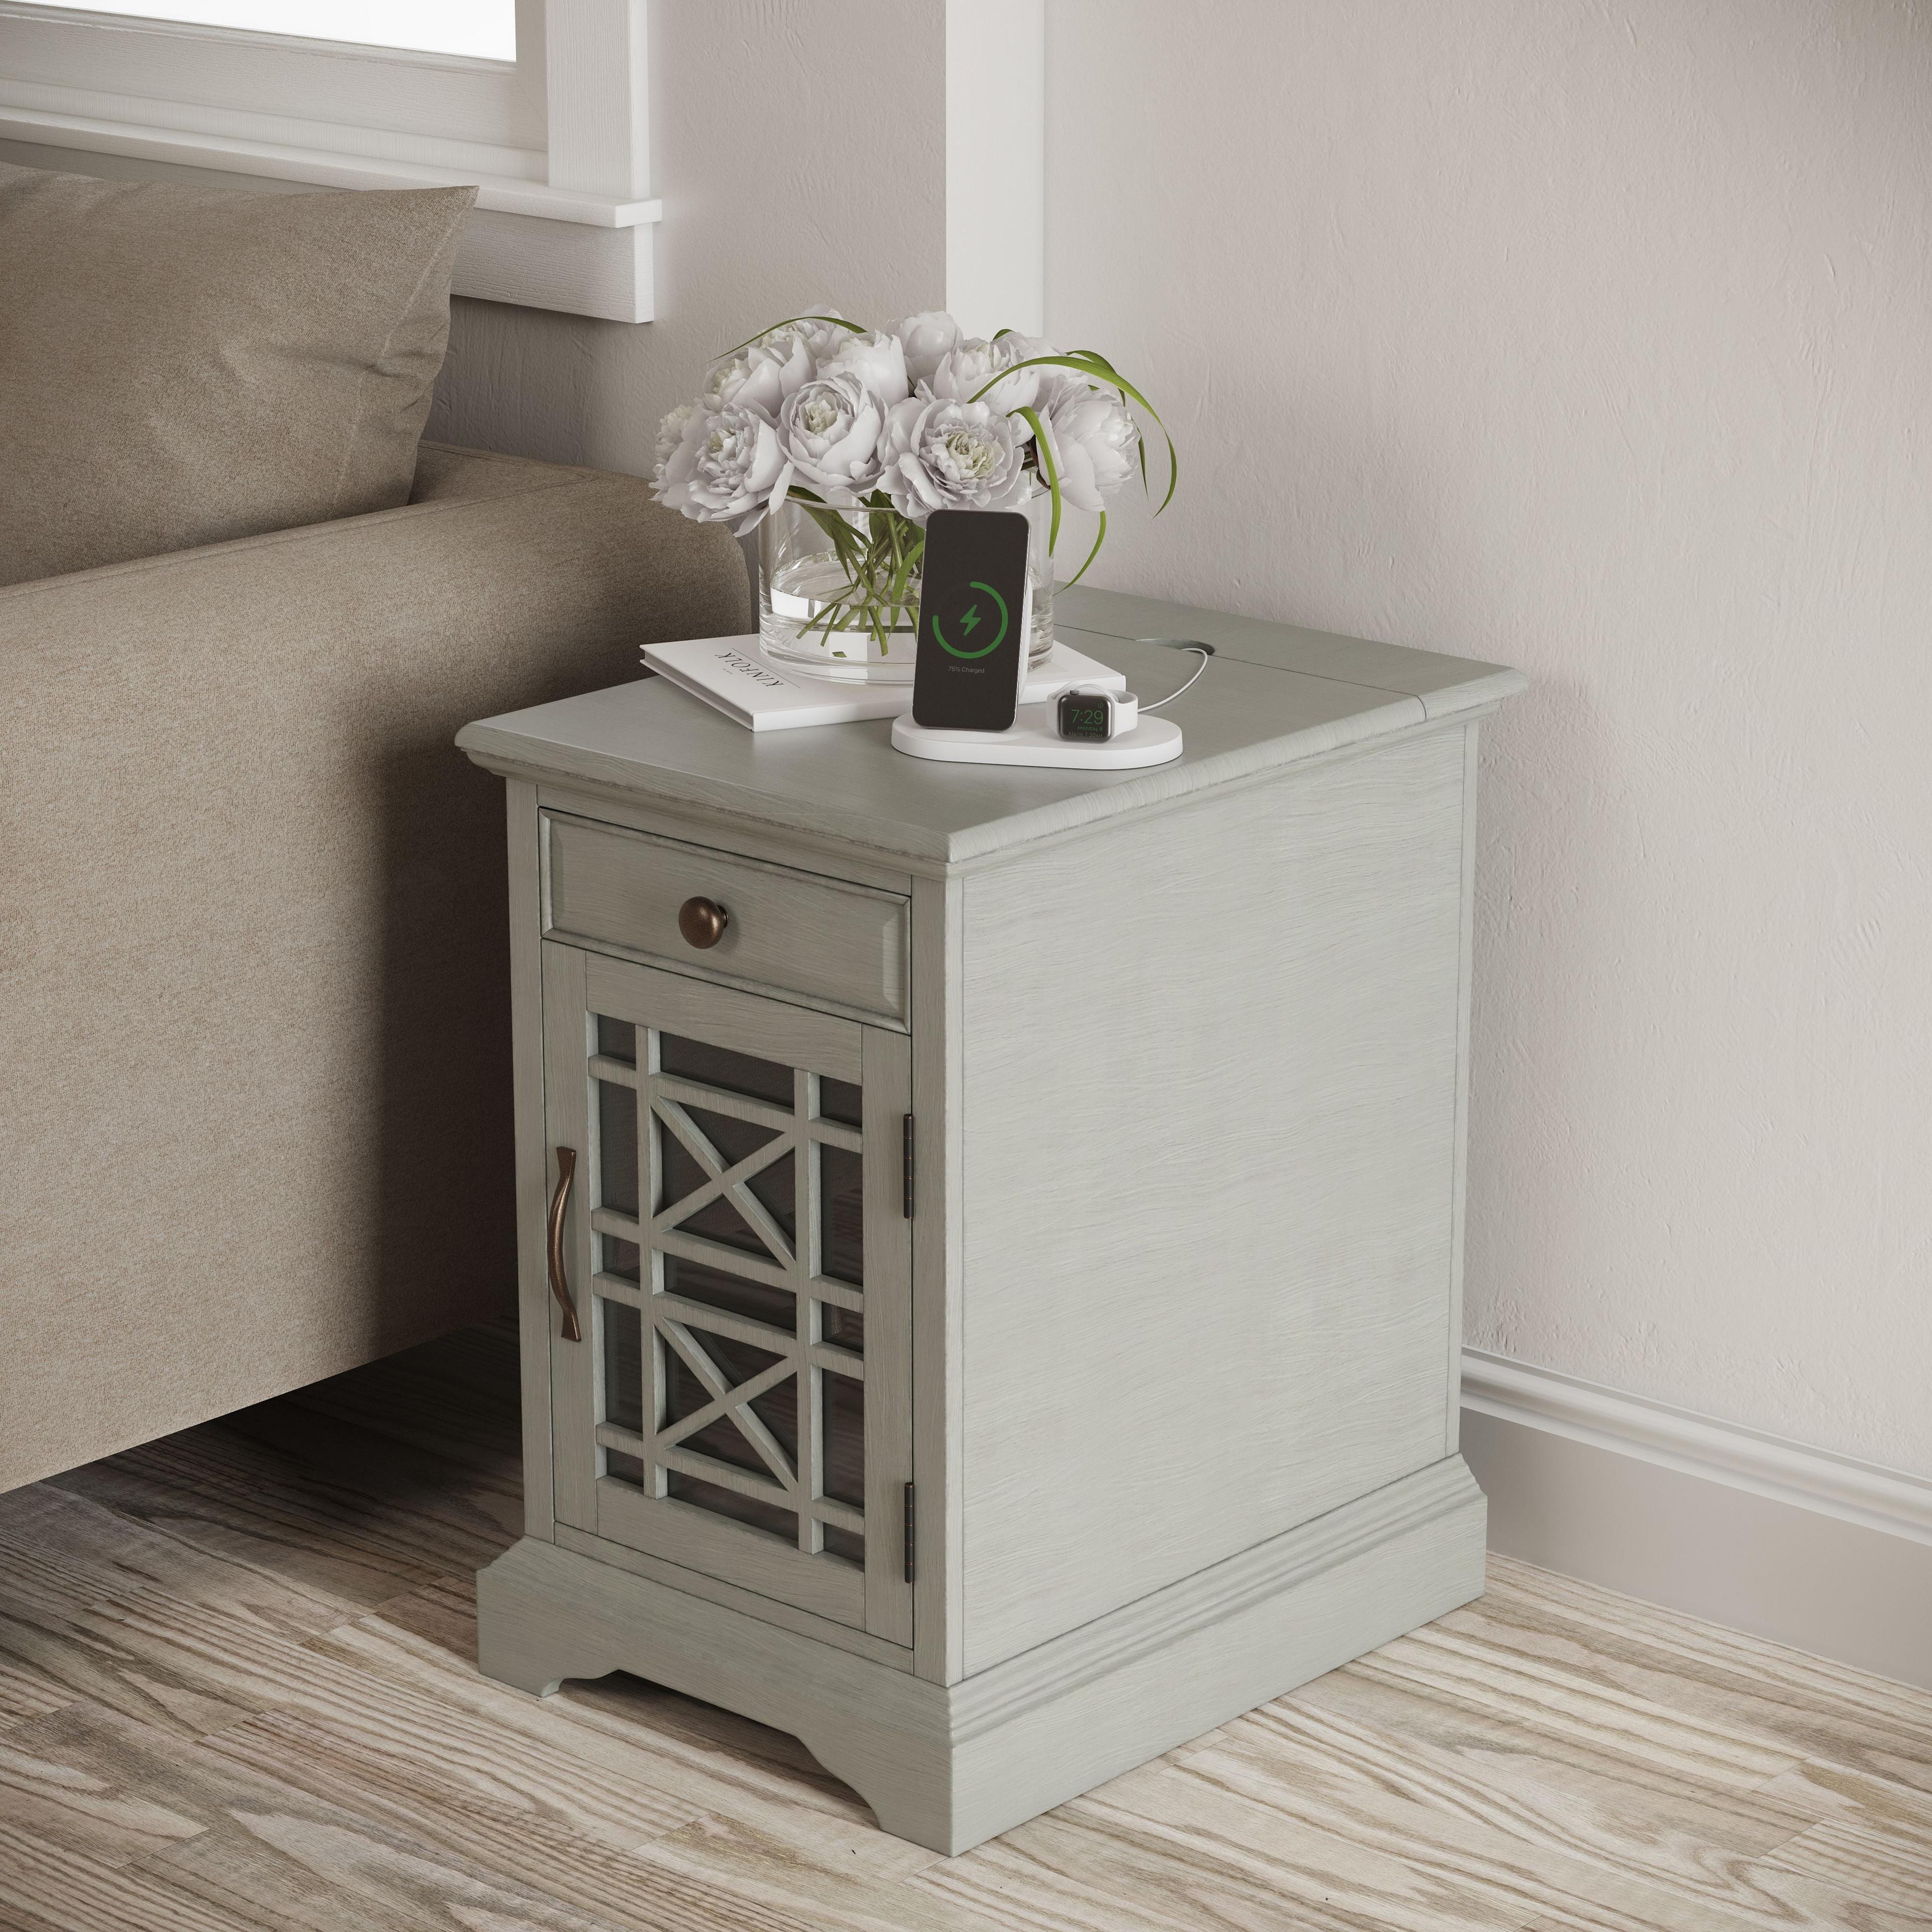 Earl Grey Transitional USB Charging Chairside Table with Glass Door